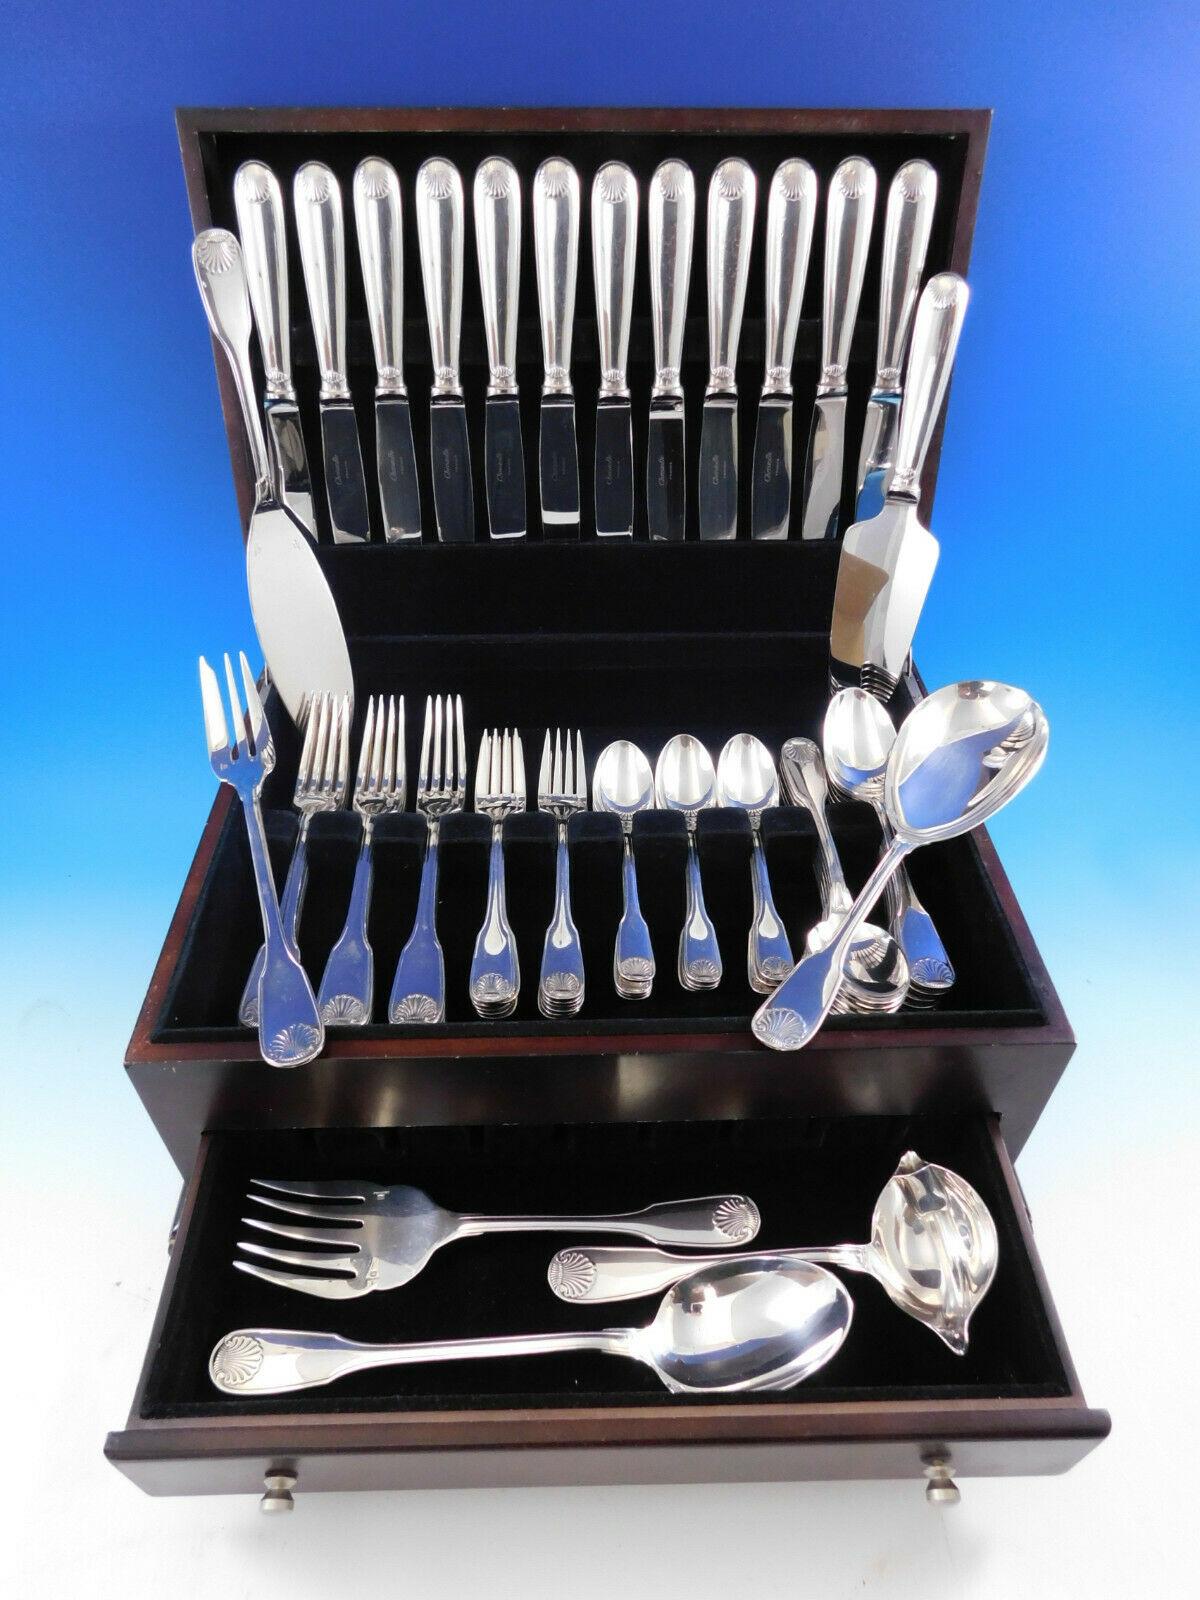 Outstanding dinner size Vendome Arcantia by Christofle France silver plated flatware set, 67 pieces. This pattern features the same shell motif that adorned the ceremonial silverware used during the reign of King Louis XIV. This set includes:

12